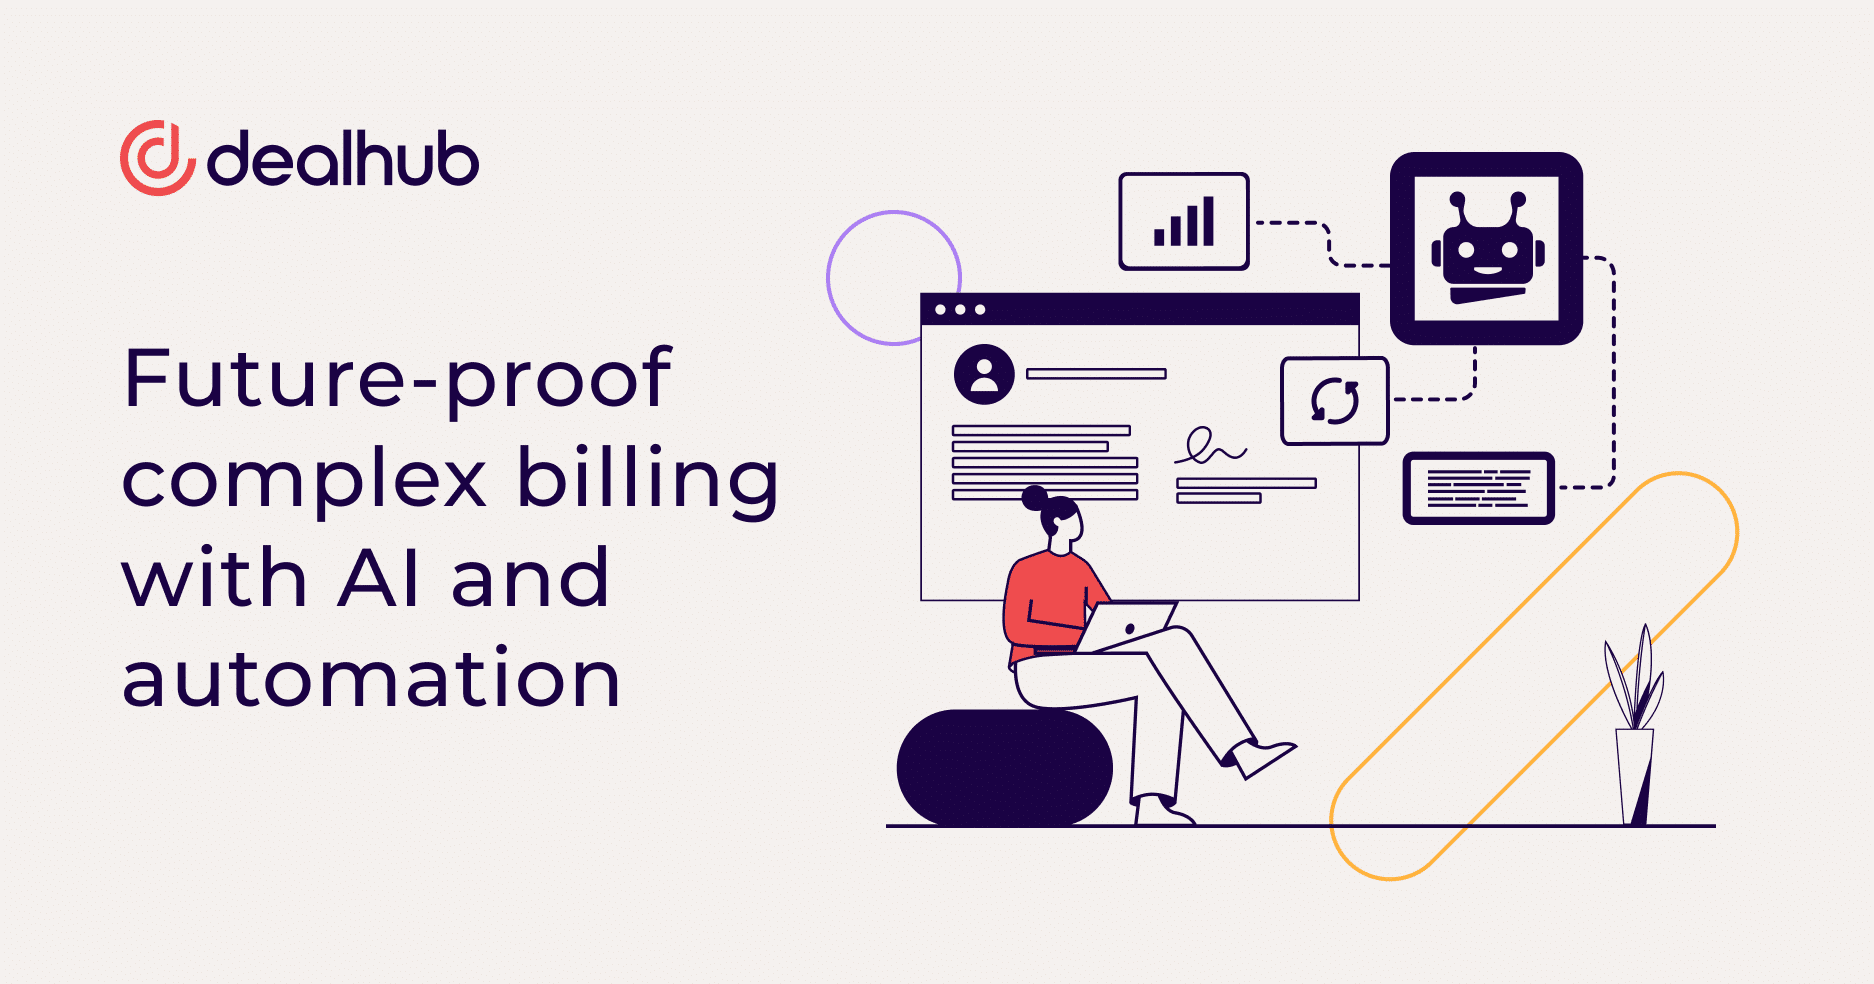 Future-proof complex billing with AI and automation